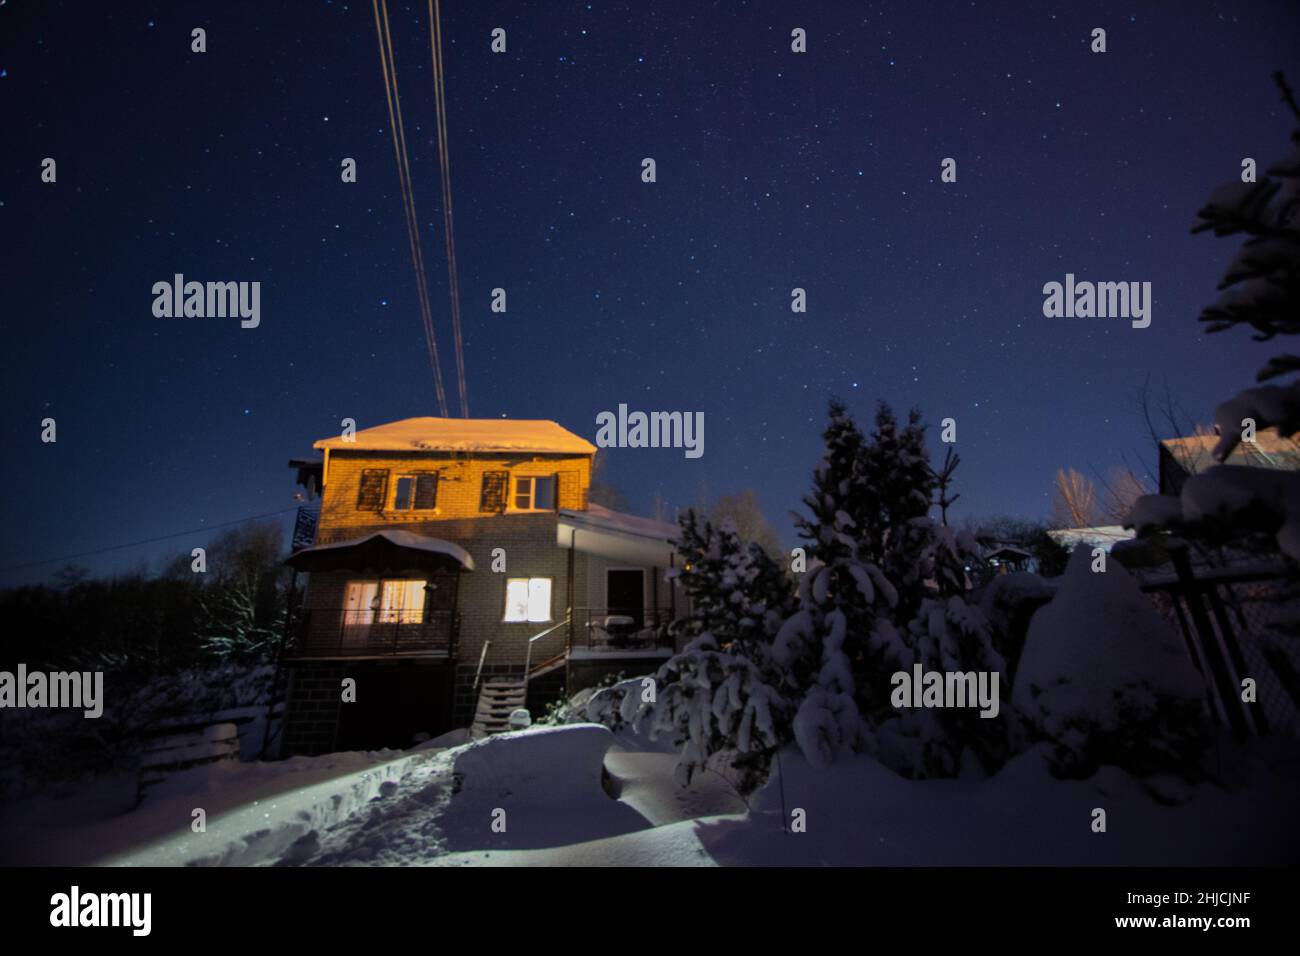 Wooden house with a light in the windows. Night landscape in winter. Stock Photo